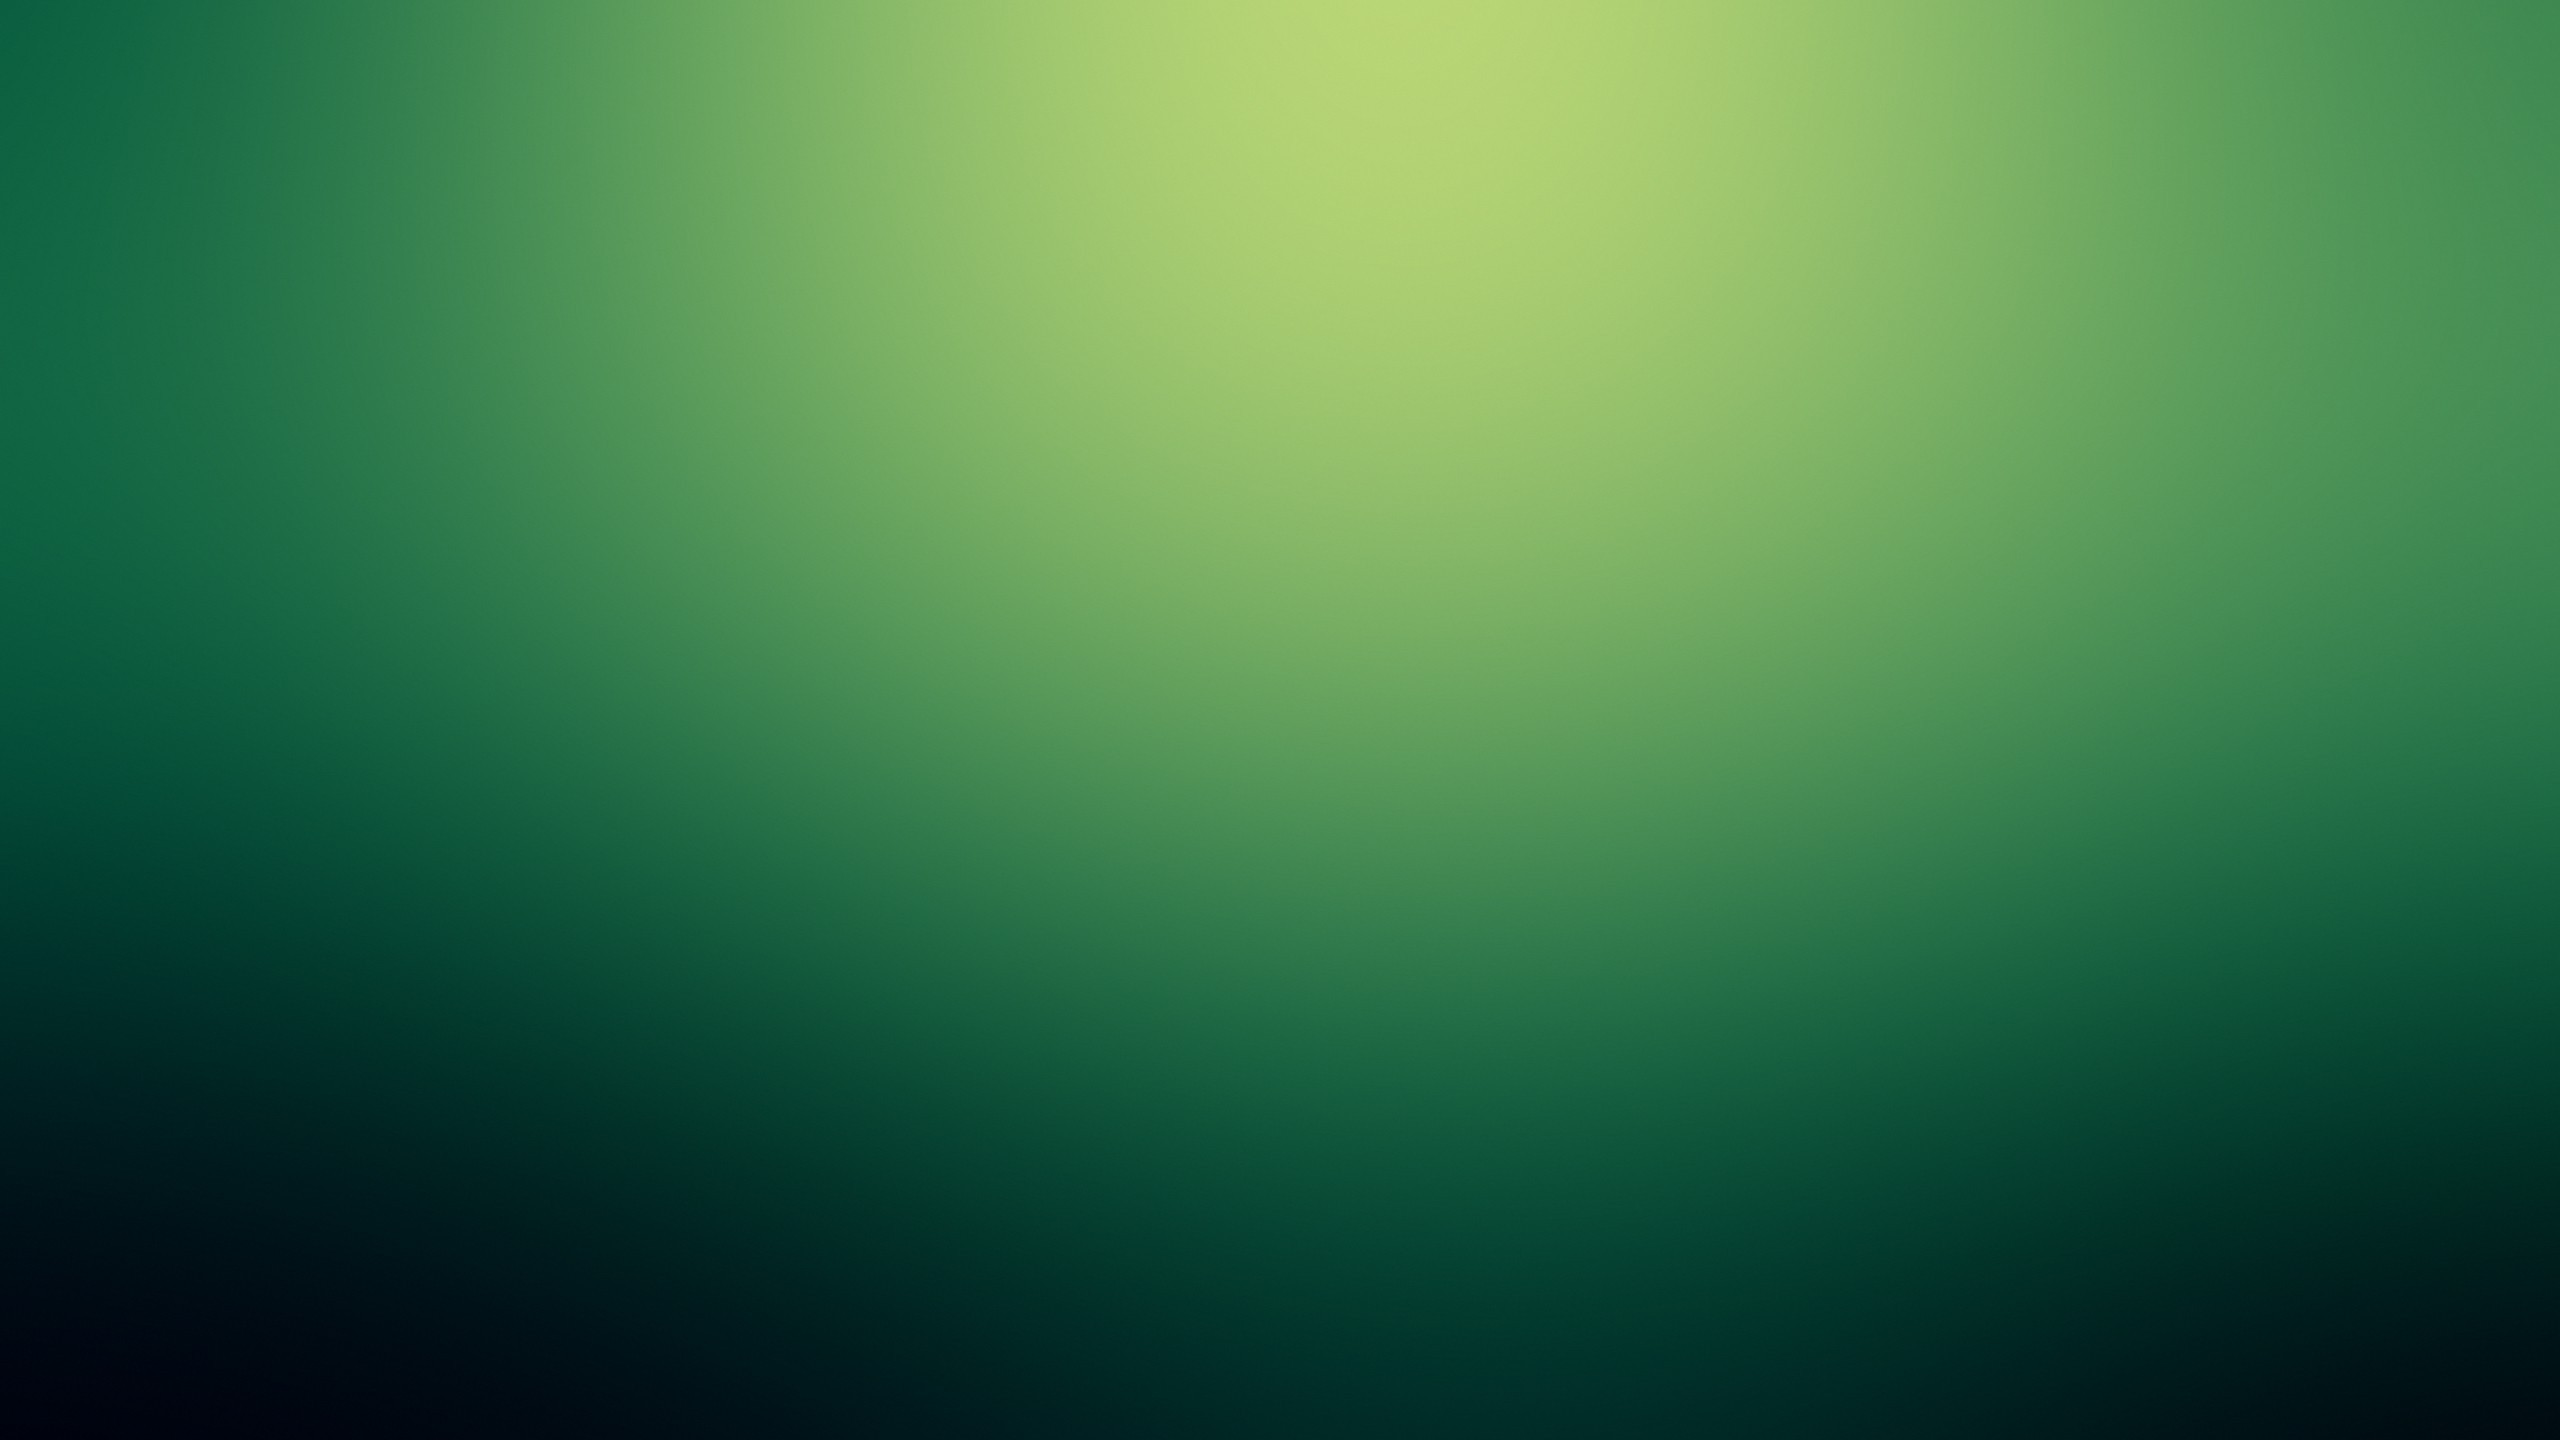 Green And Black Gradient Wallpapers